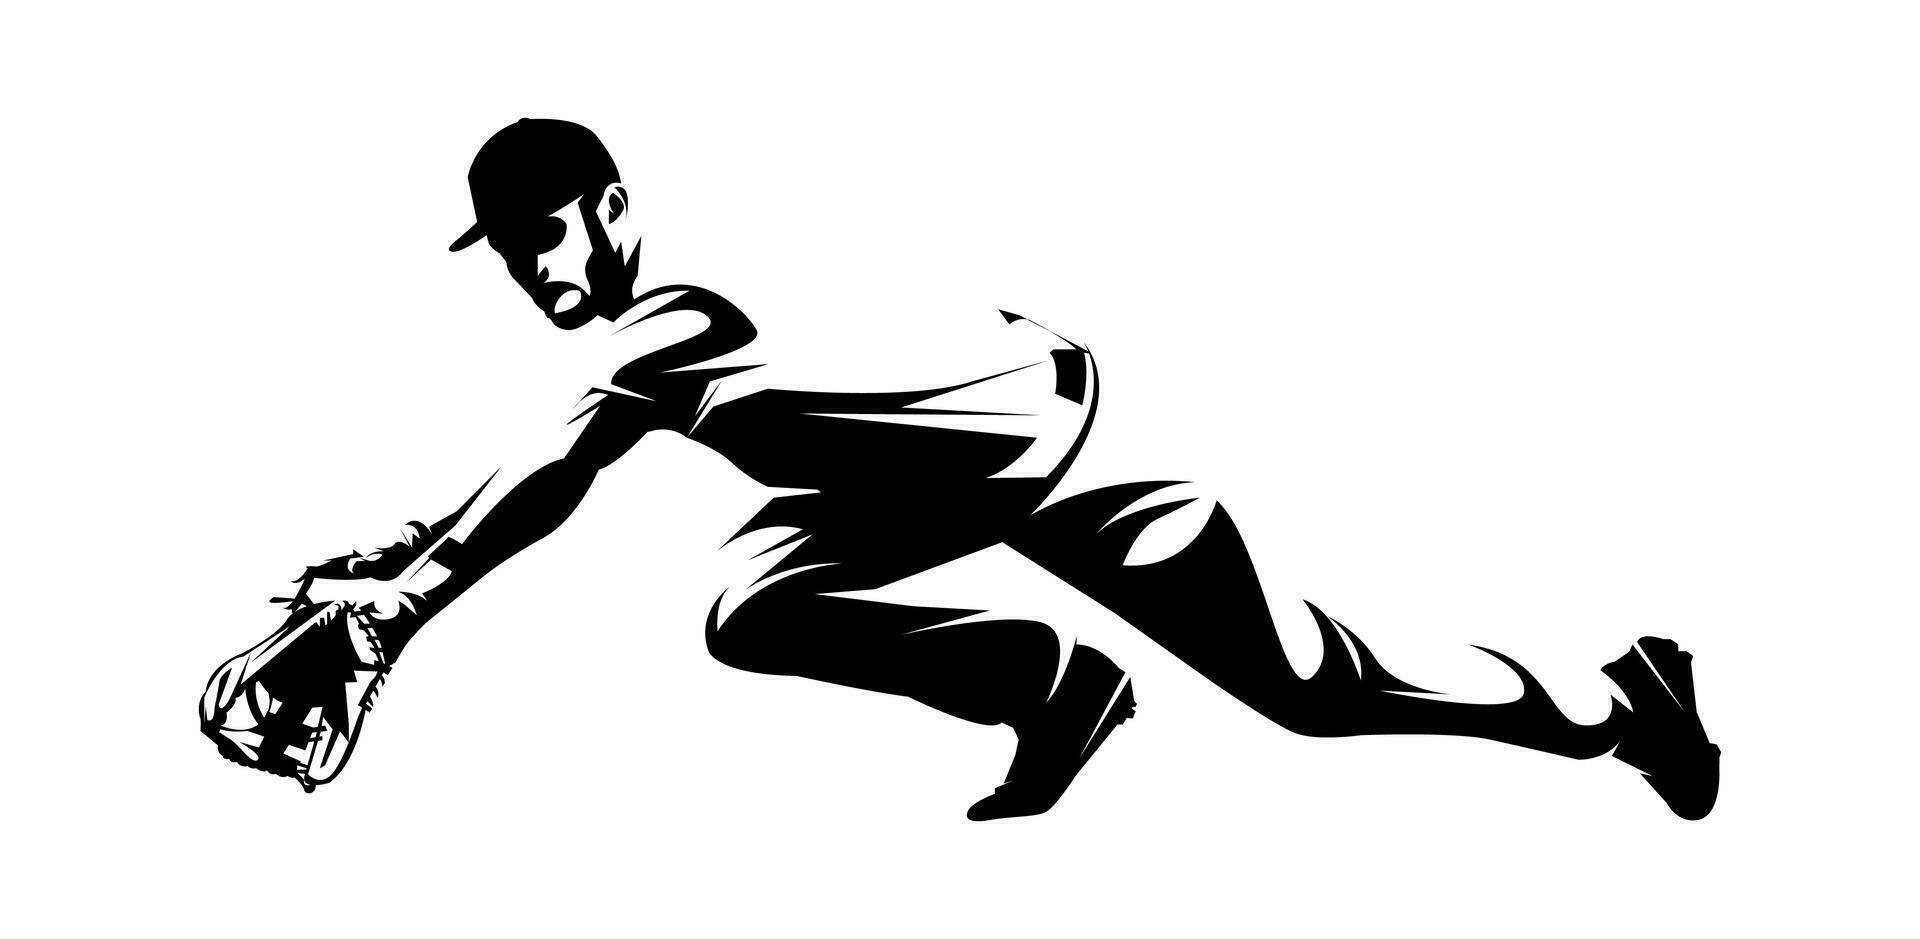 Male baseball player silhouettes on white background isolated. Silhouette of a male baseball player catching the ball vector illustration